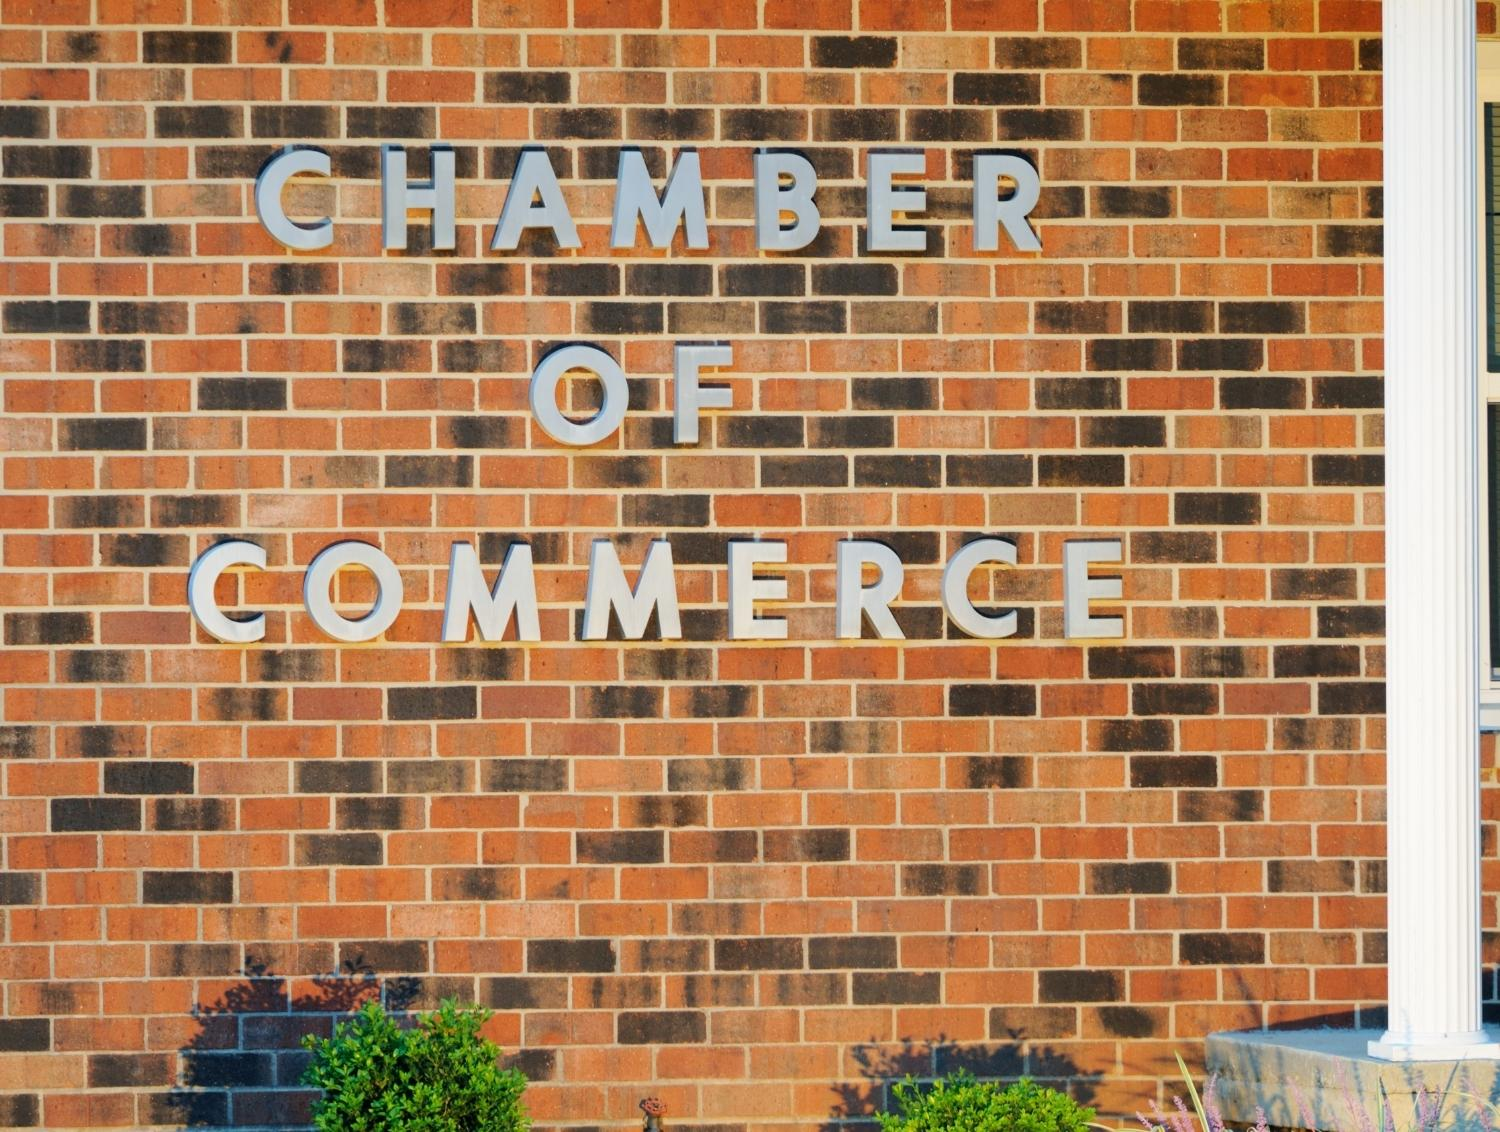 the front of a local chamber of commerce building who's members would benefit from a local e-commerce marketplace where their chamber members could list products for sale